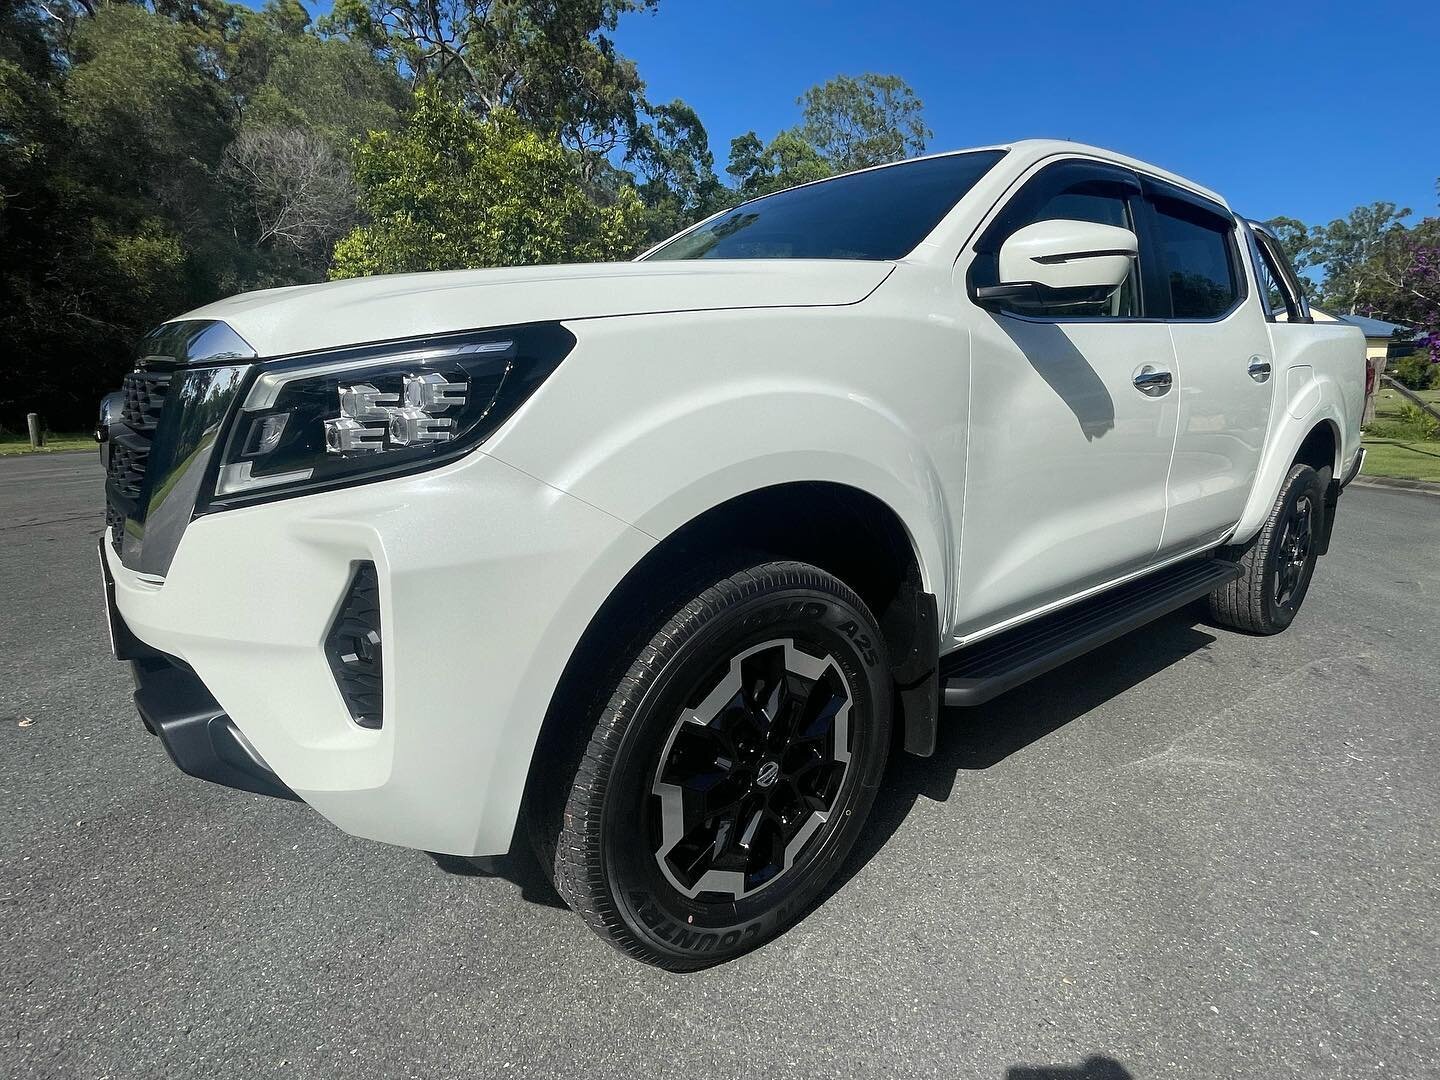 Brand new Nissan Navara in for Paint and interior Protection Package..⚒ PDRTECH Autocare Surface Protection. 📱0407118815 #pdrtechautocare #graphenecoating #atripro #tevocreations #protectyourinvestmant #protectionpackages #paintcorrection #grapheneo